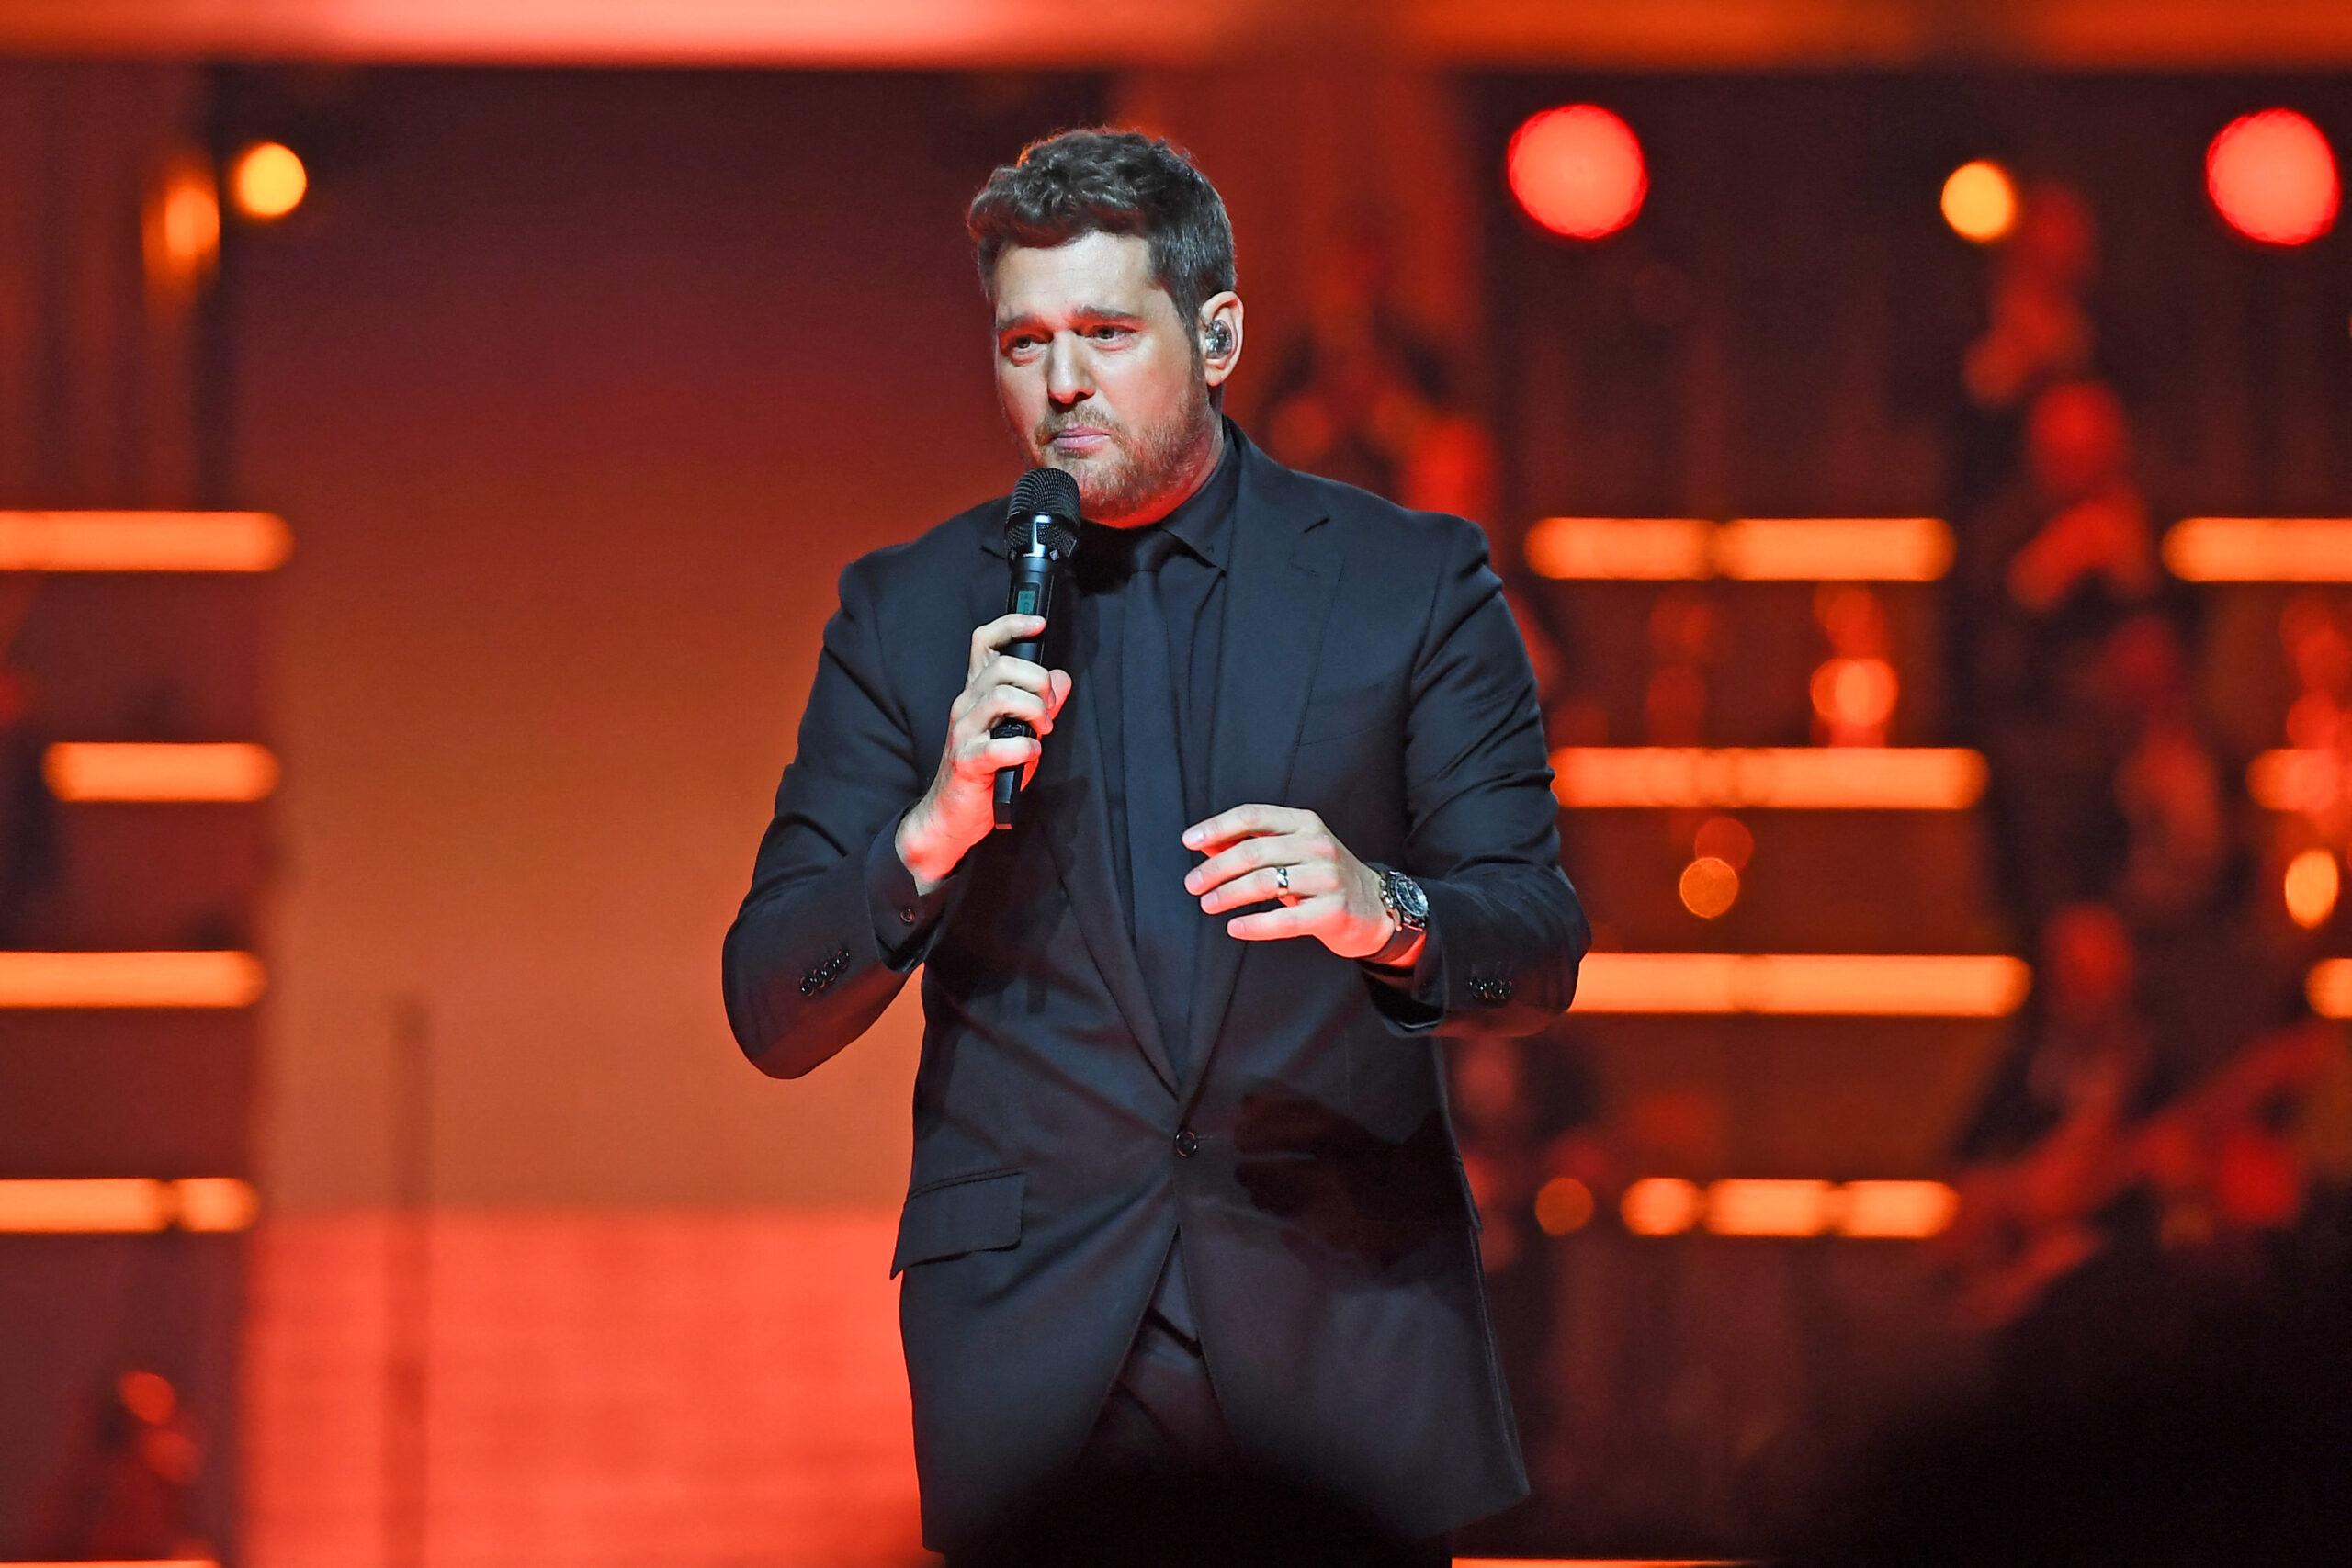 Michael Bublé Says He Was On 'Microdose' Of Shrooms At All-Star Game [VIDEO]